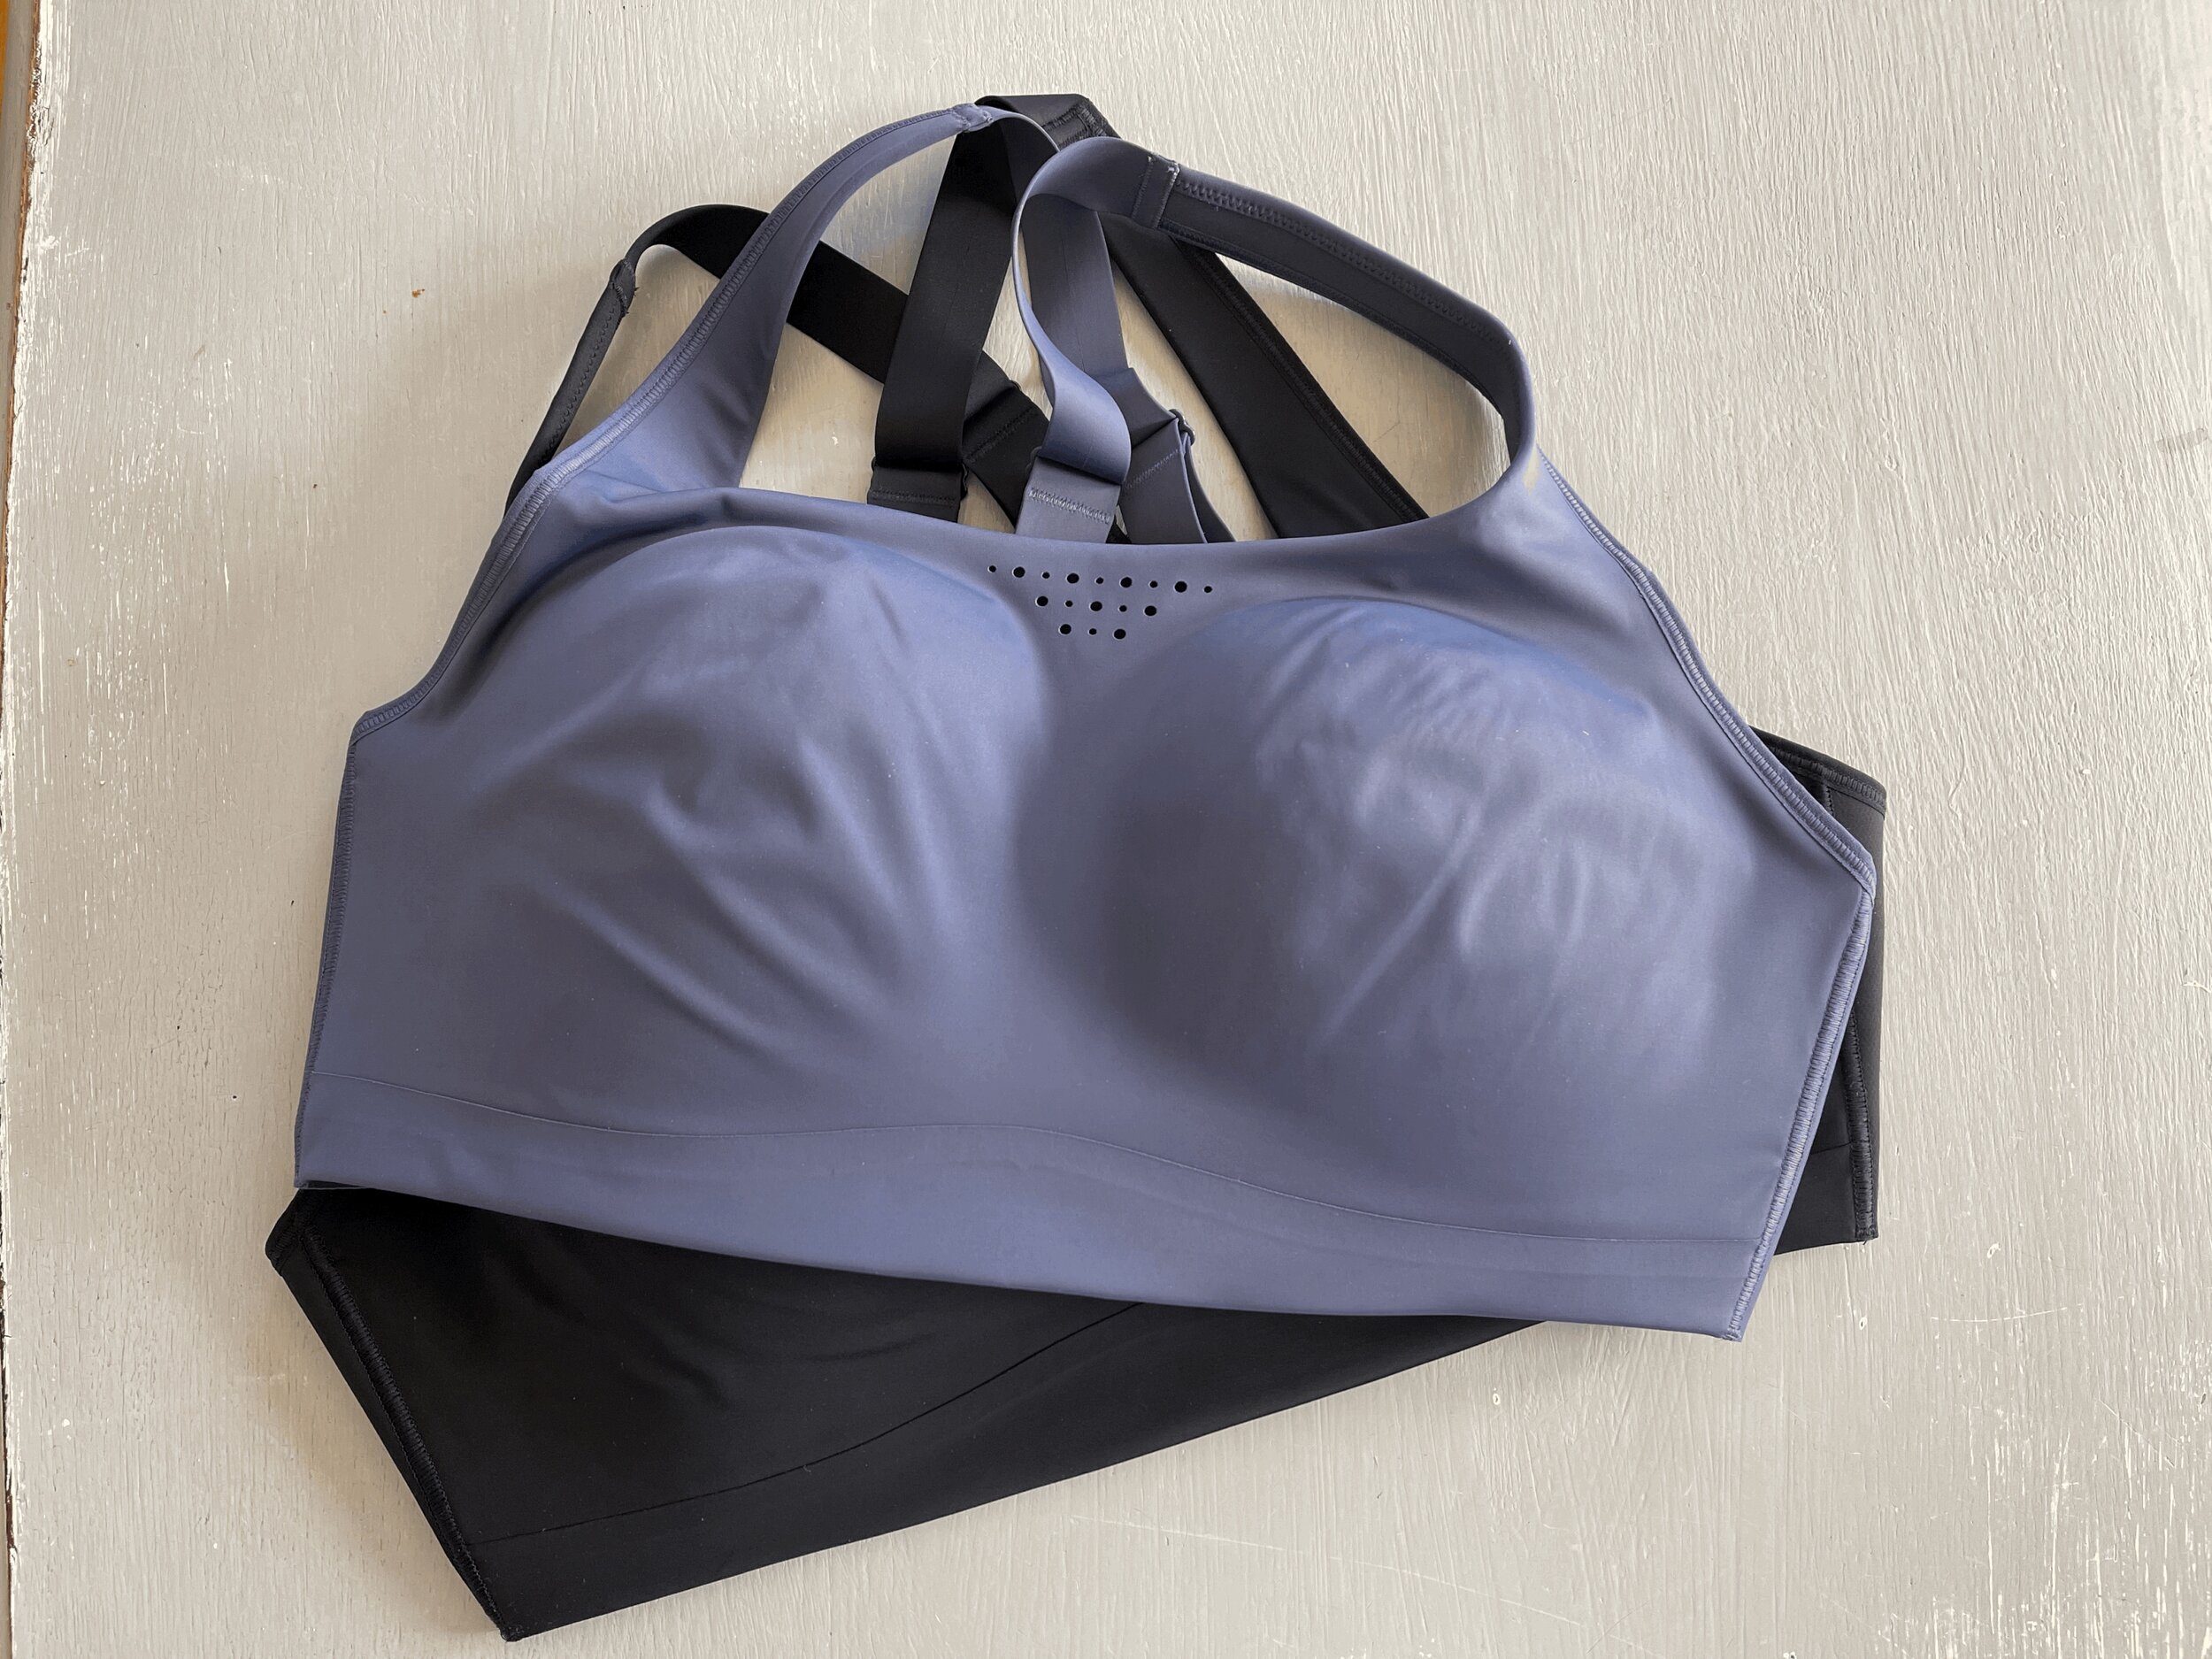 It Takes Two (To Put a Bra On Right!) -A Product Review